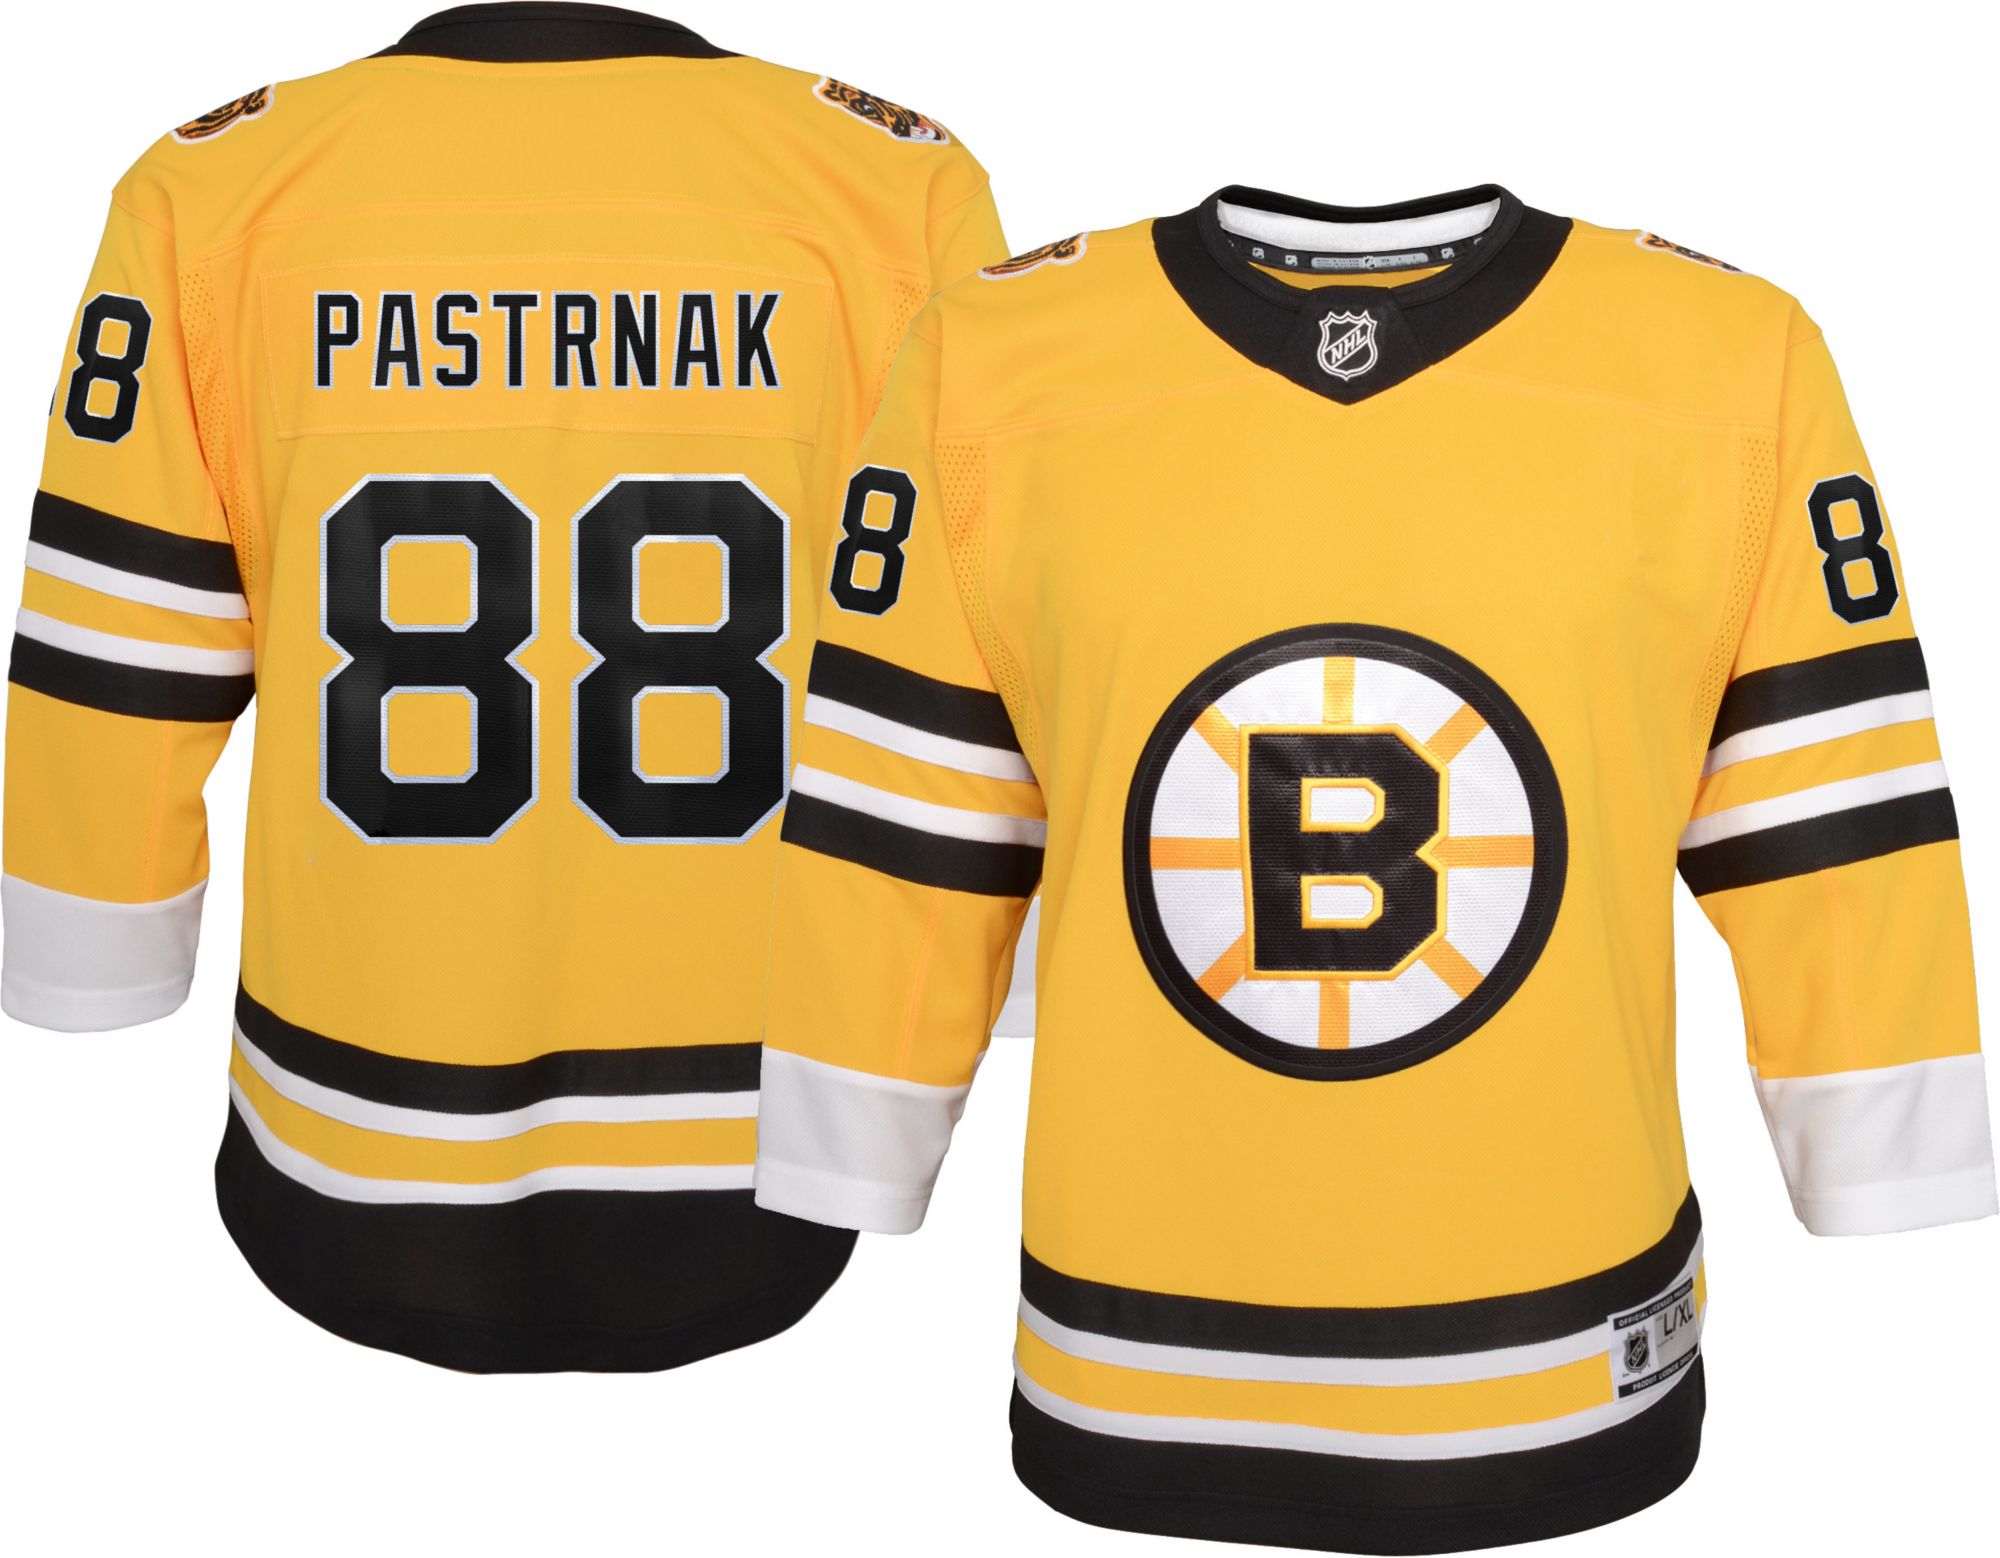 youth pastrnak jersey